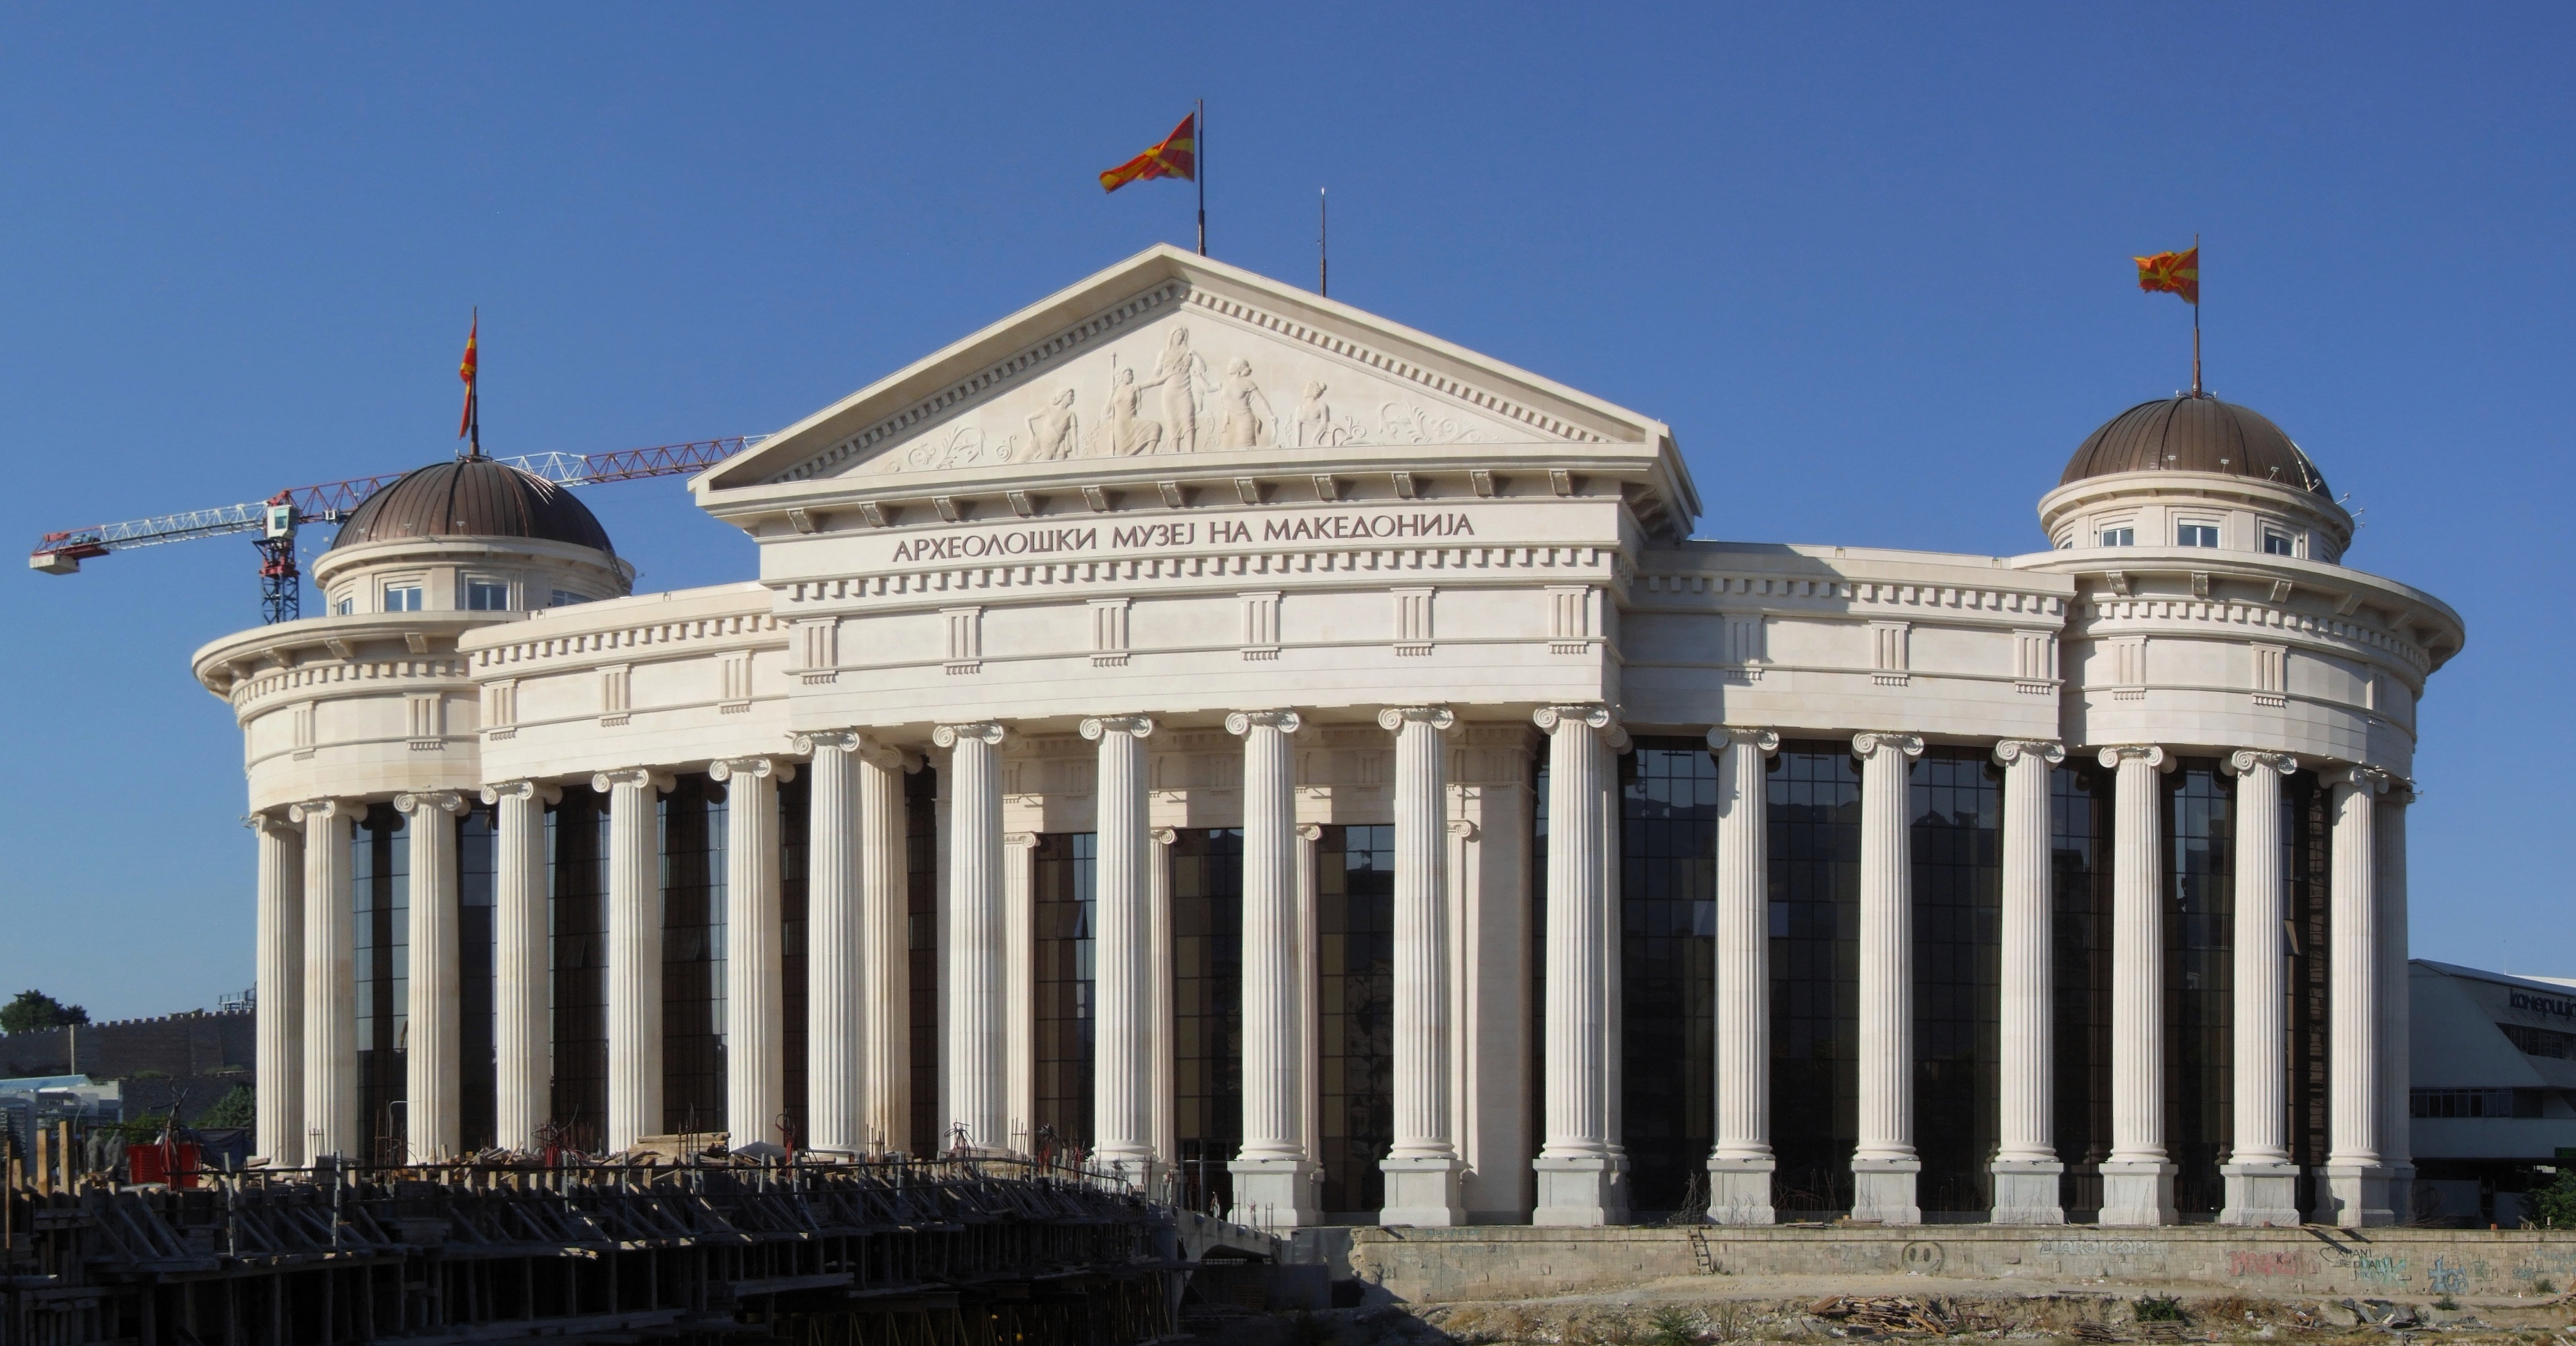 Archeological Museum of Macedonia (by Pudelek)